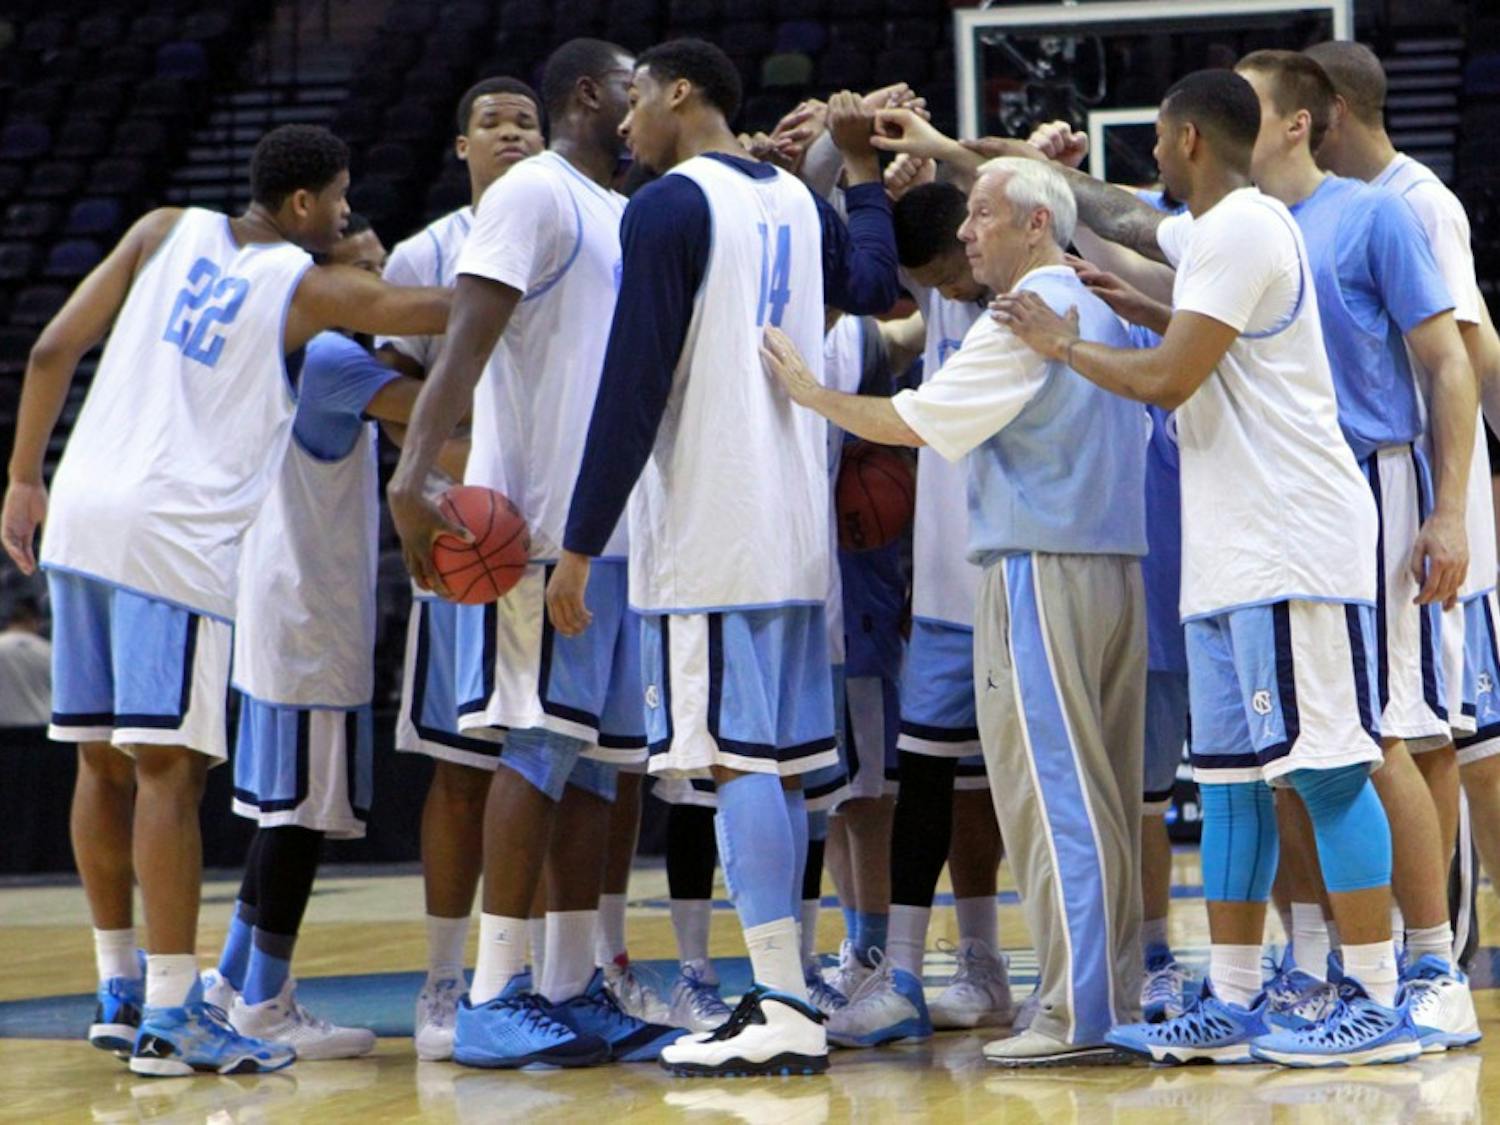 The team huddles at center court to end the practice. The UNC men's basketball team held an open practice at the AT&T Center in San Antonio on Thursday. The Tar Heels will face Providence in the second round of the NCAA tournament on Friday.